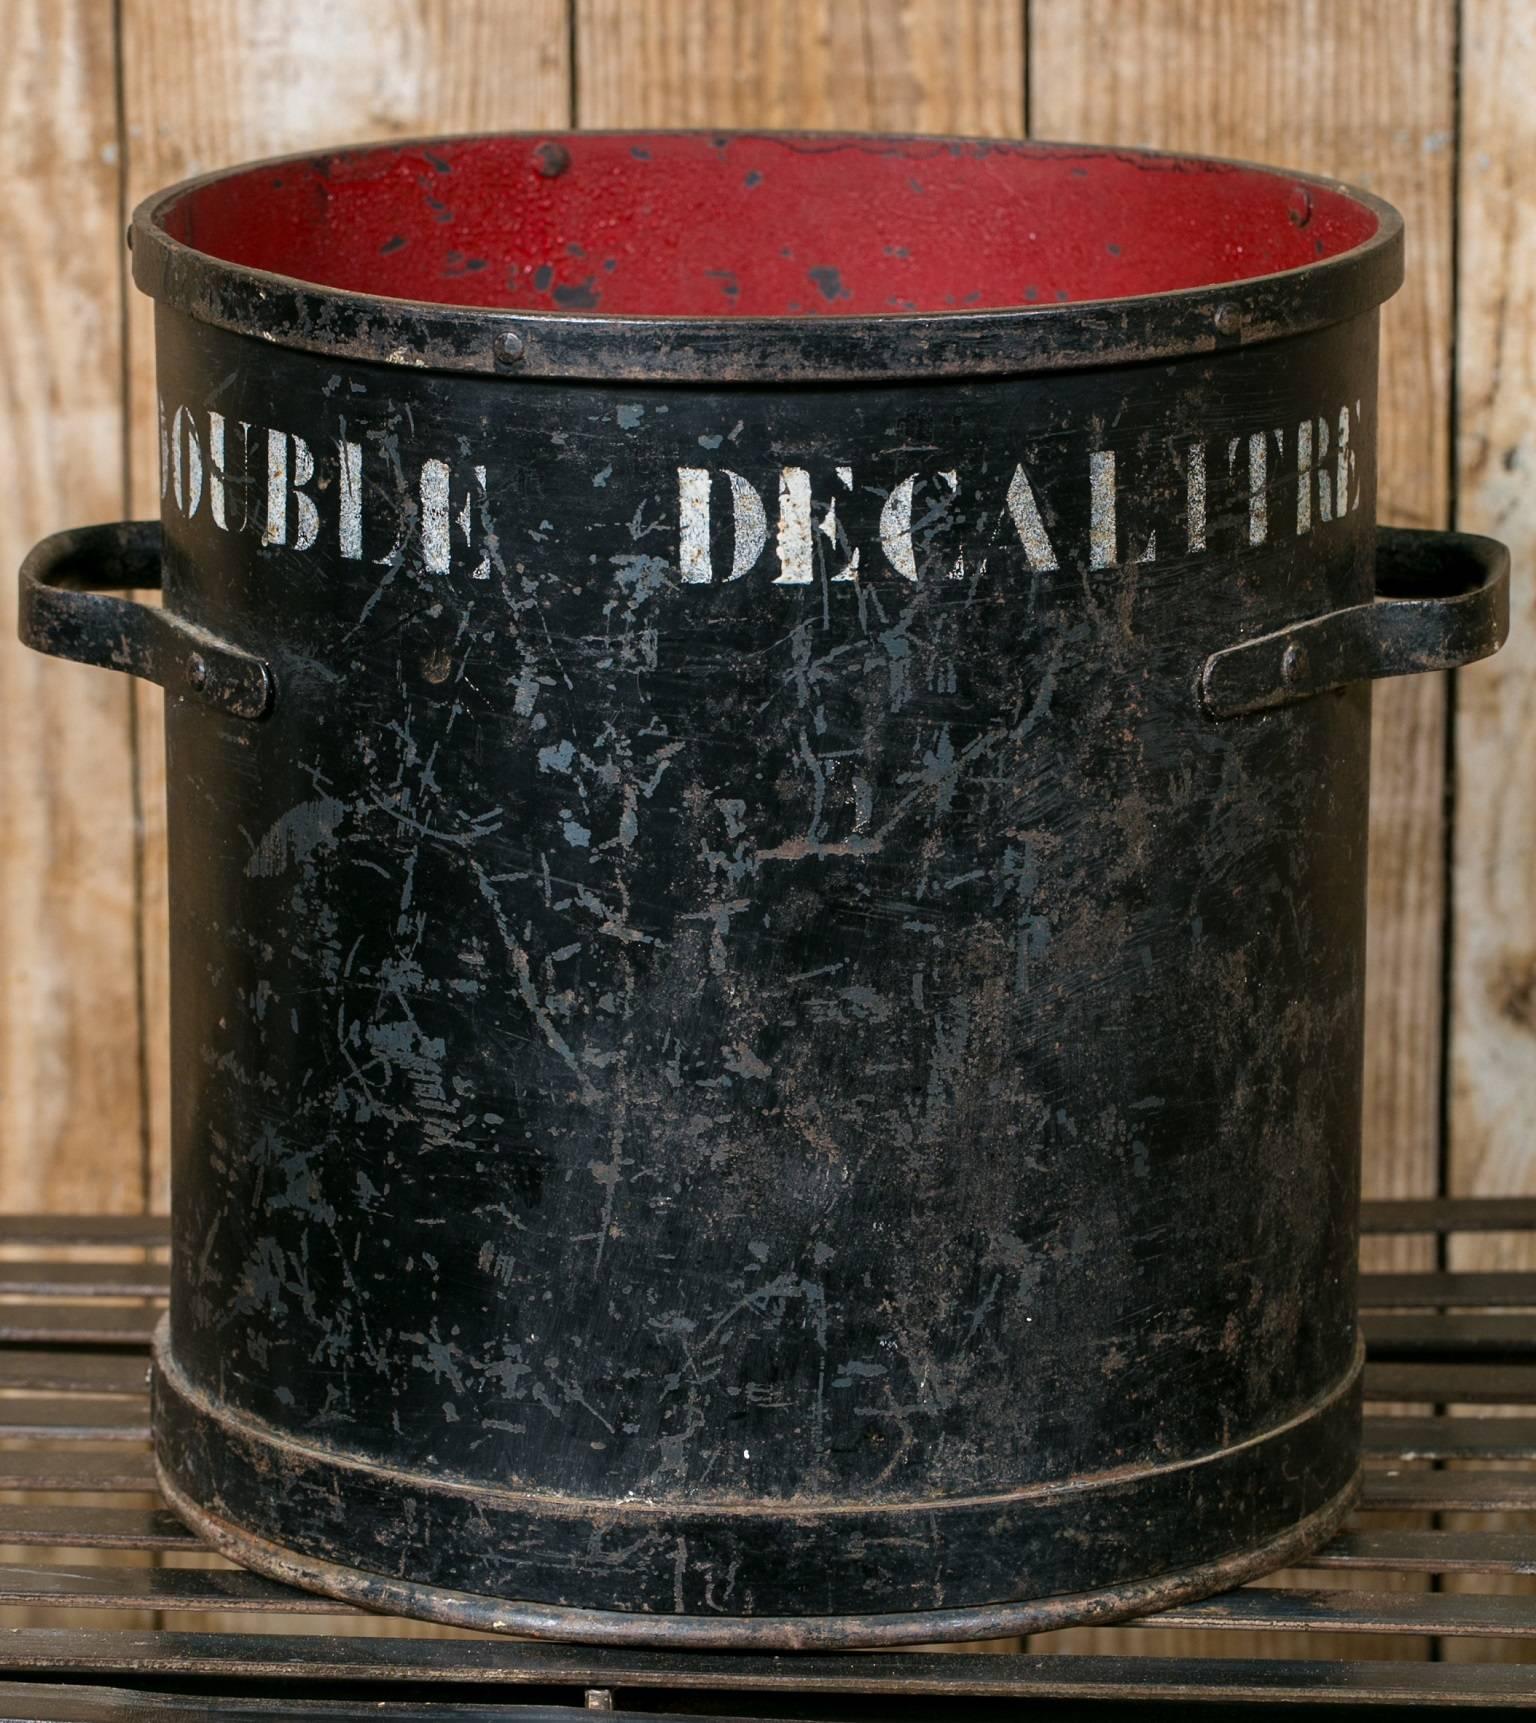 Wonderful old Belgian measure with two handles. All original with black paint on the outside, red paint on the inside and white stencilling on across the top labelling it as a double decalitre size. Handcrafted and painted. Great size for a waste